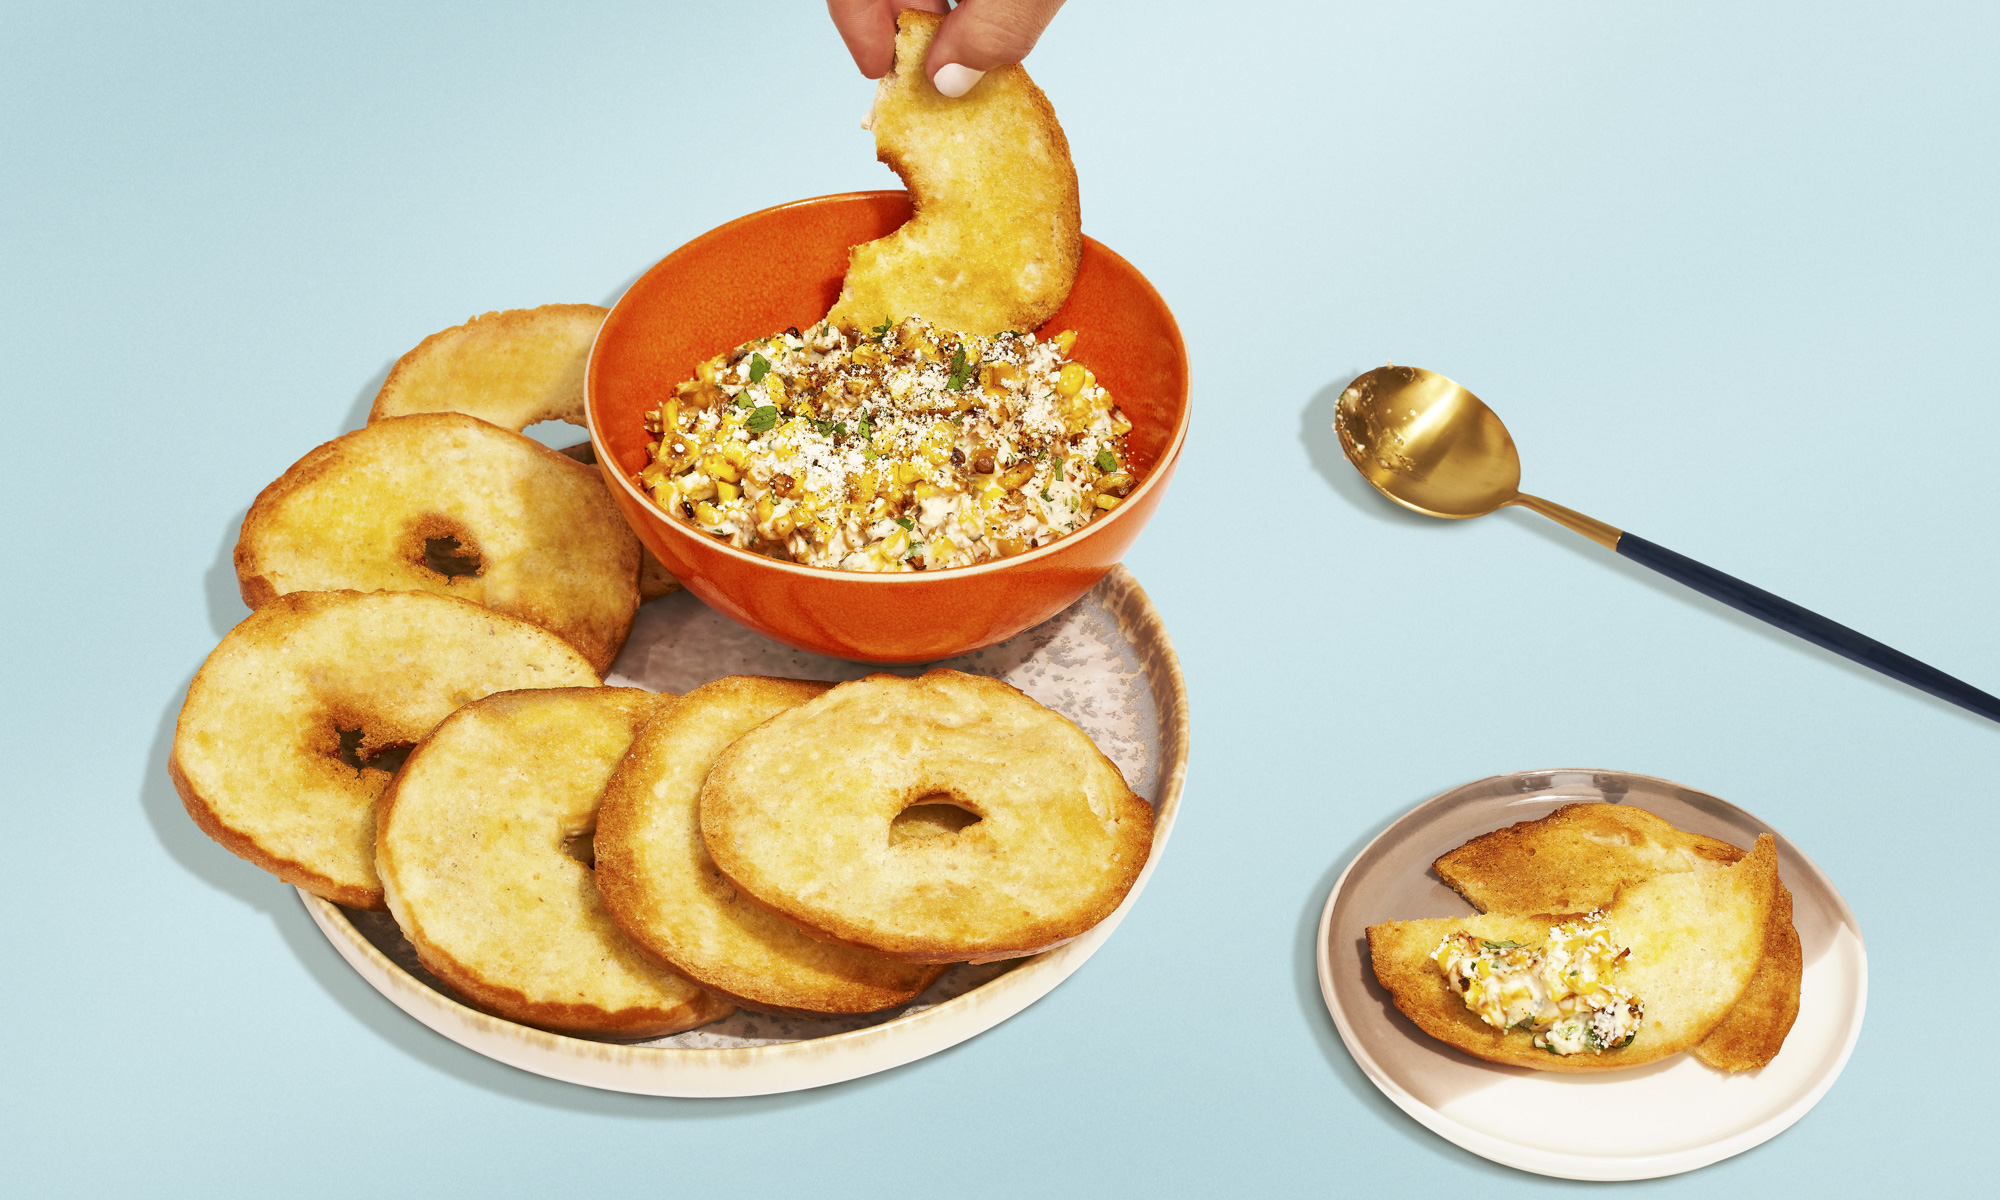 https://thomasbreads.com/sites/default/files/recipe/shots/elote_mexican_street_corn_dip_with_bagel_chips.jpg